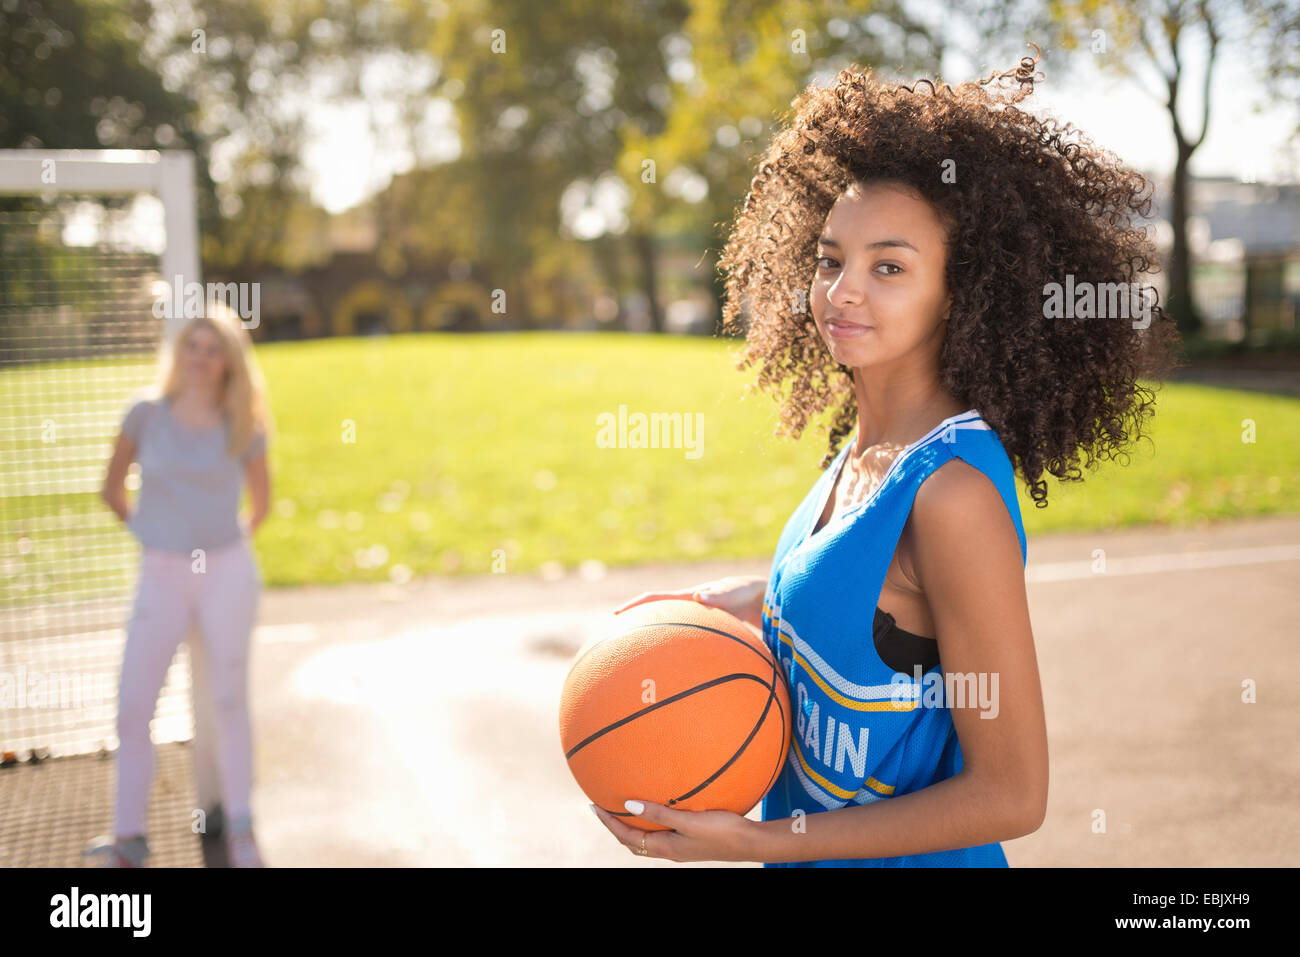 Portrait of young woman holding basketball Stock Photo